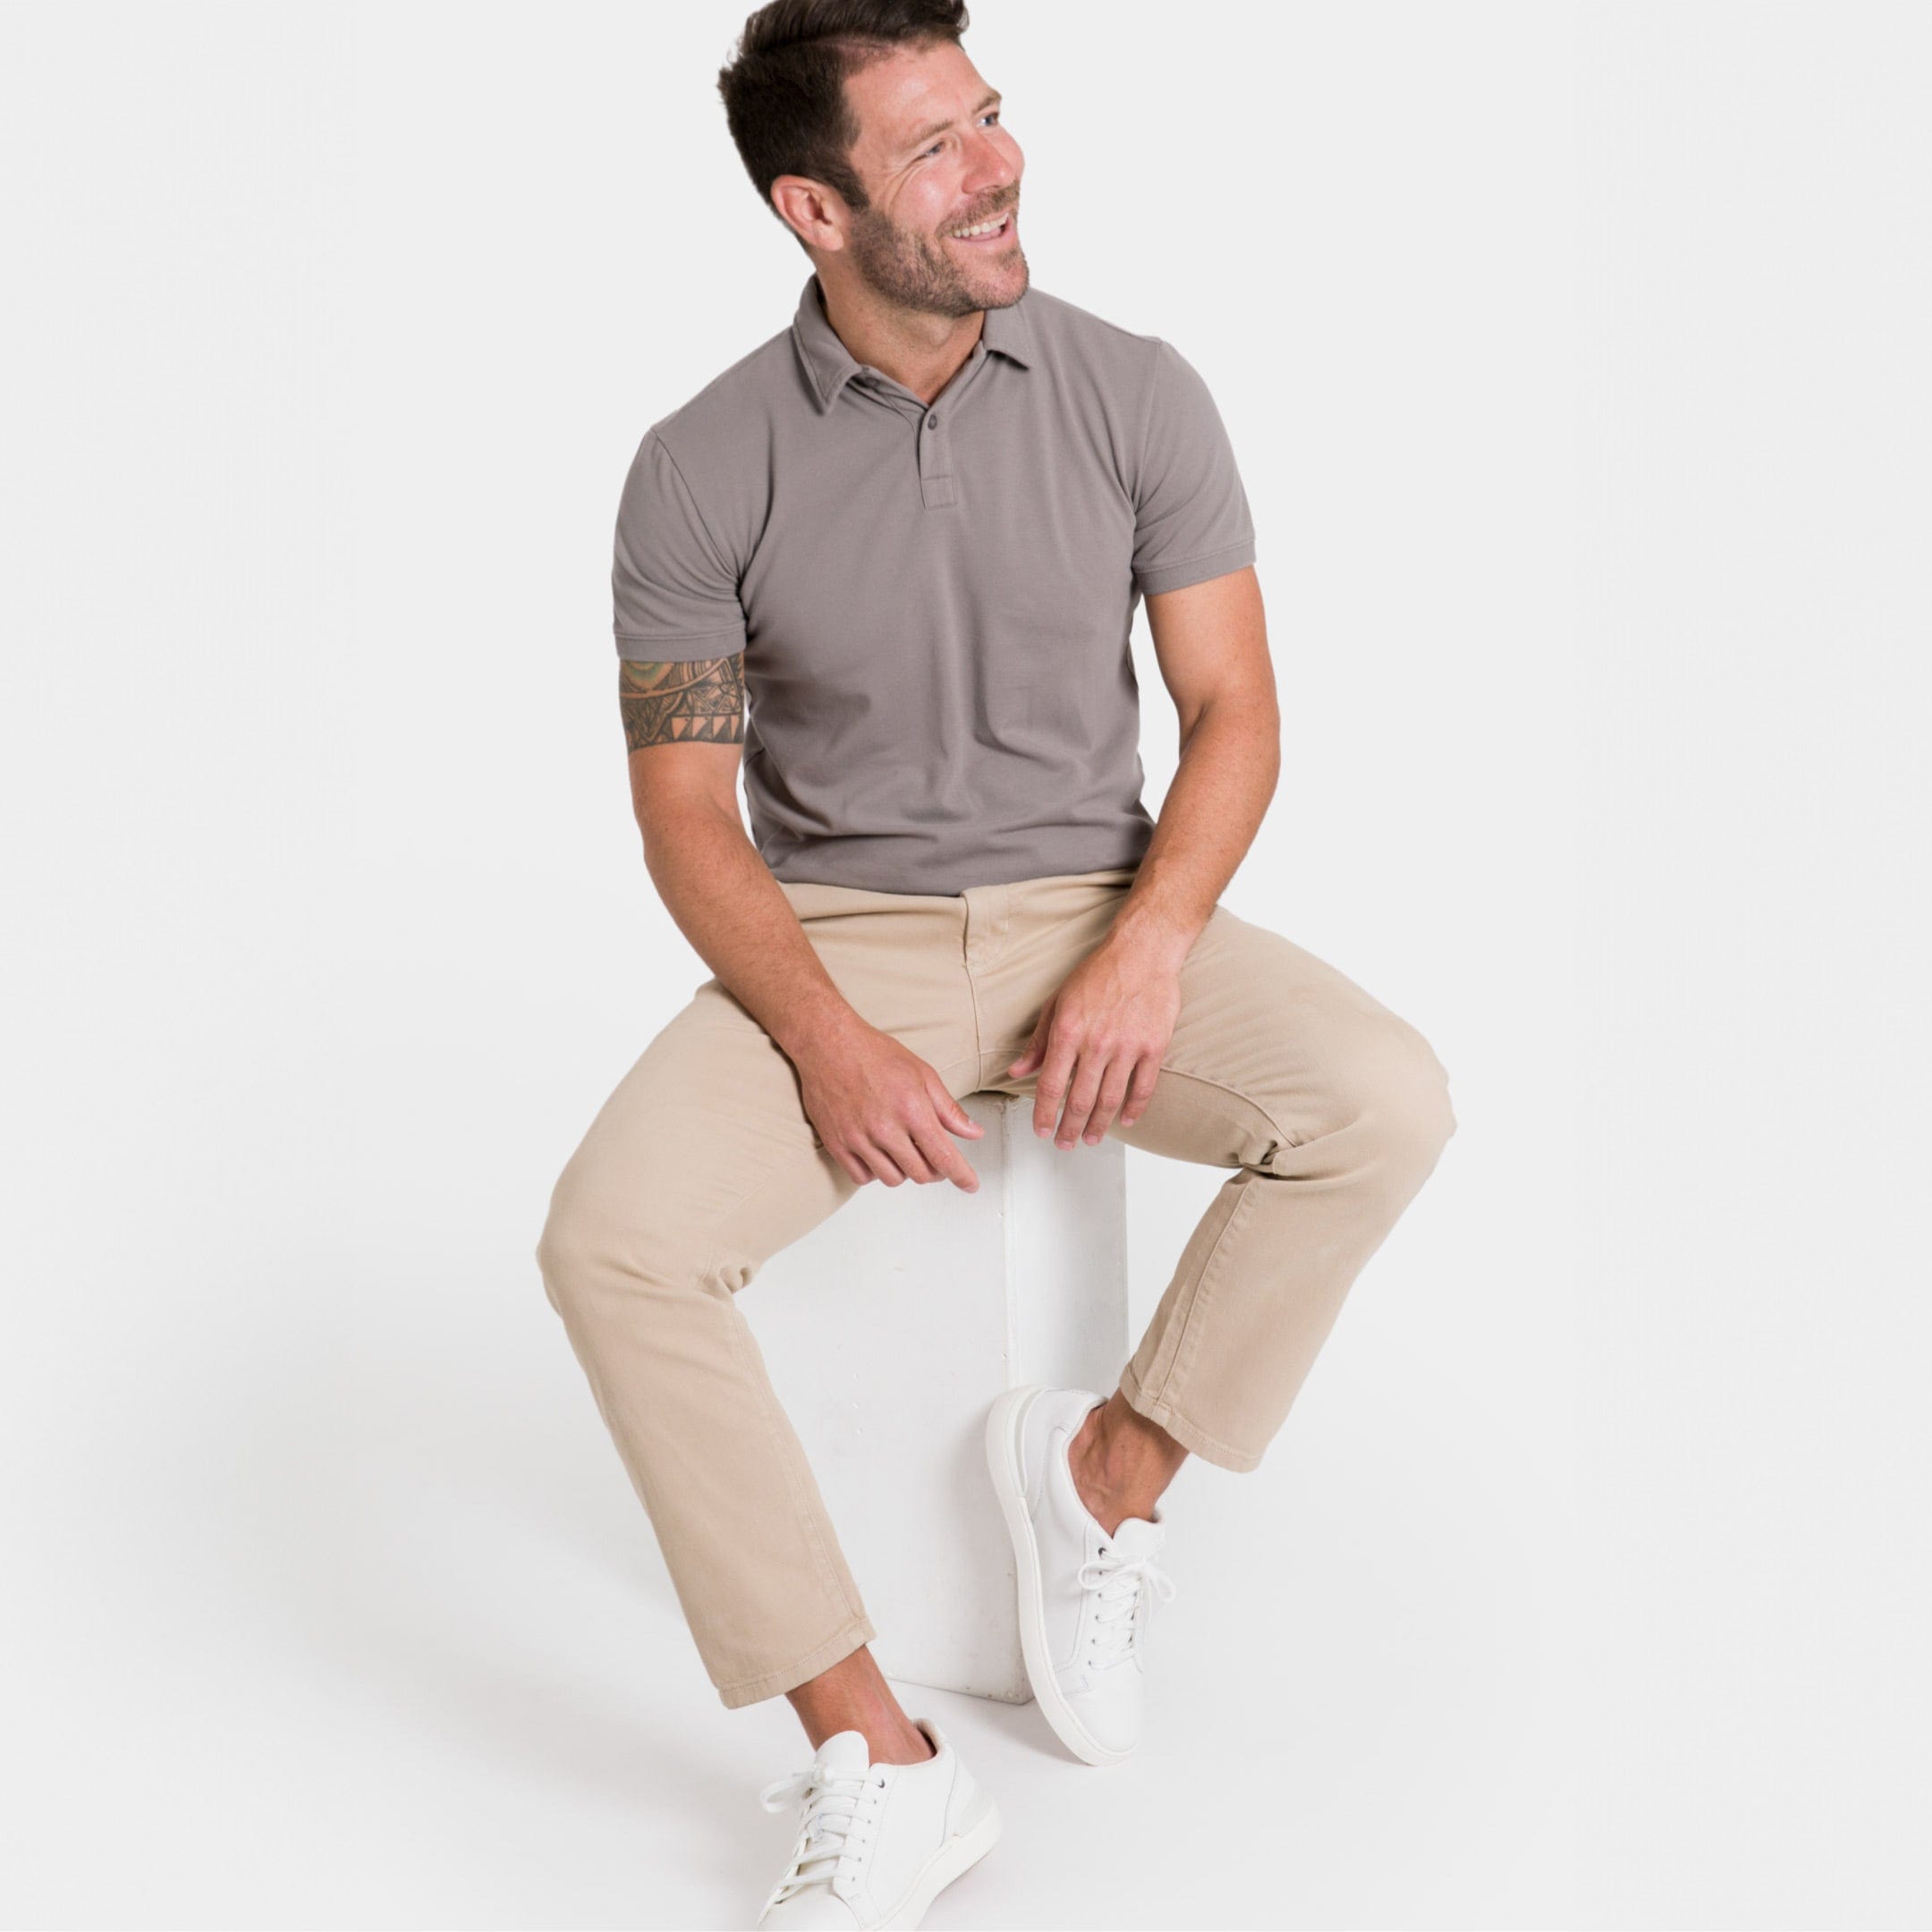 Men's Cotton/Poly Pique Blend Short Sleeve Polo Shirt in Heather Grey -  Available in Men's Sizes SMALL to 6XL Item # 750-1500